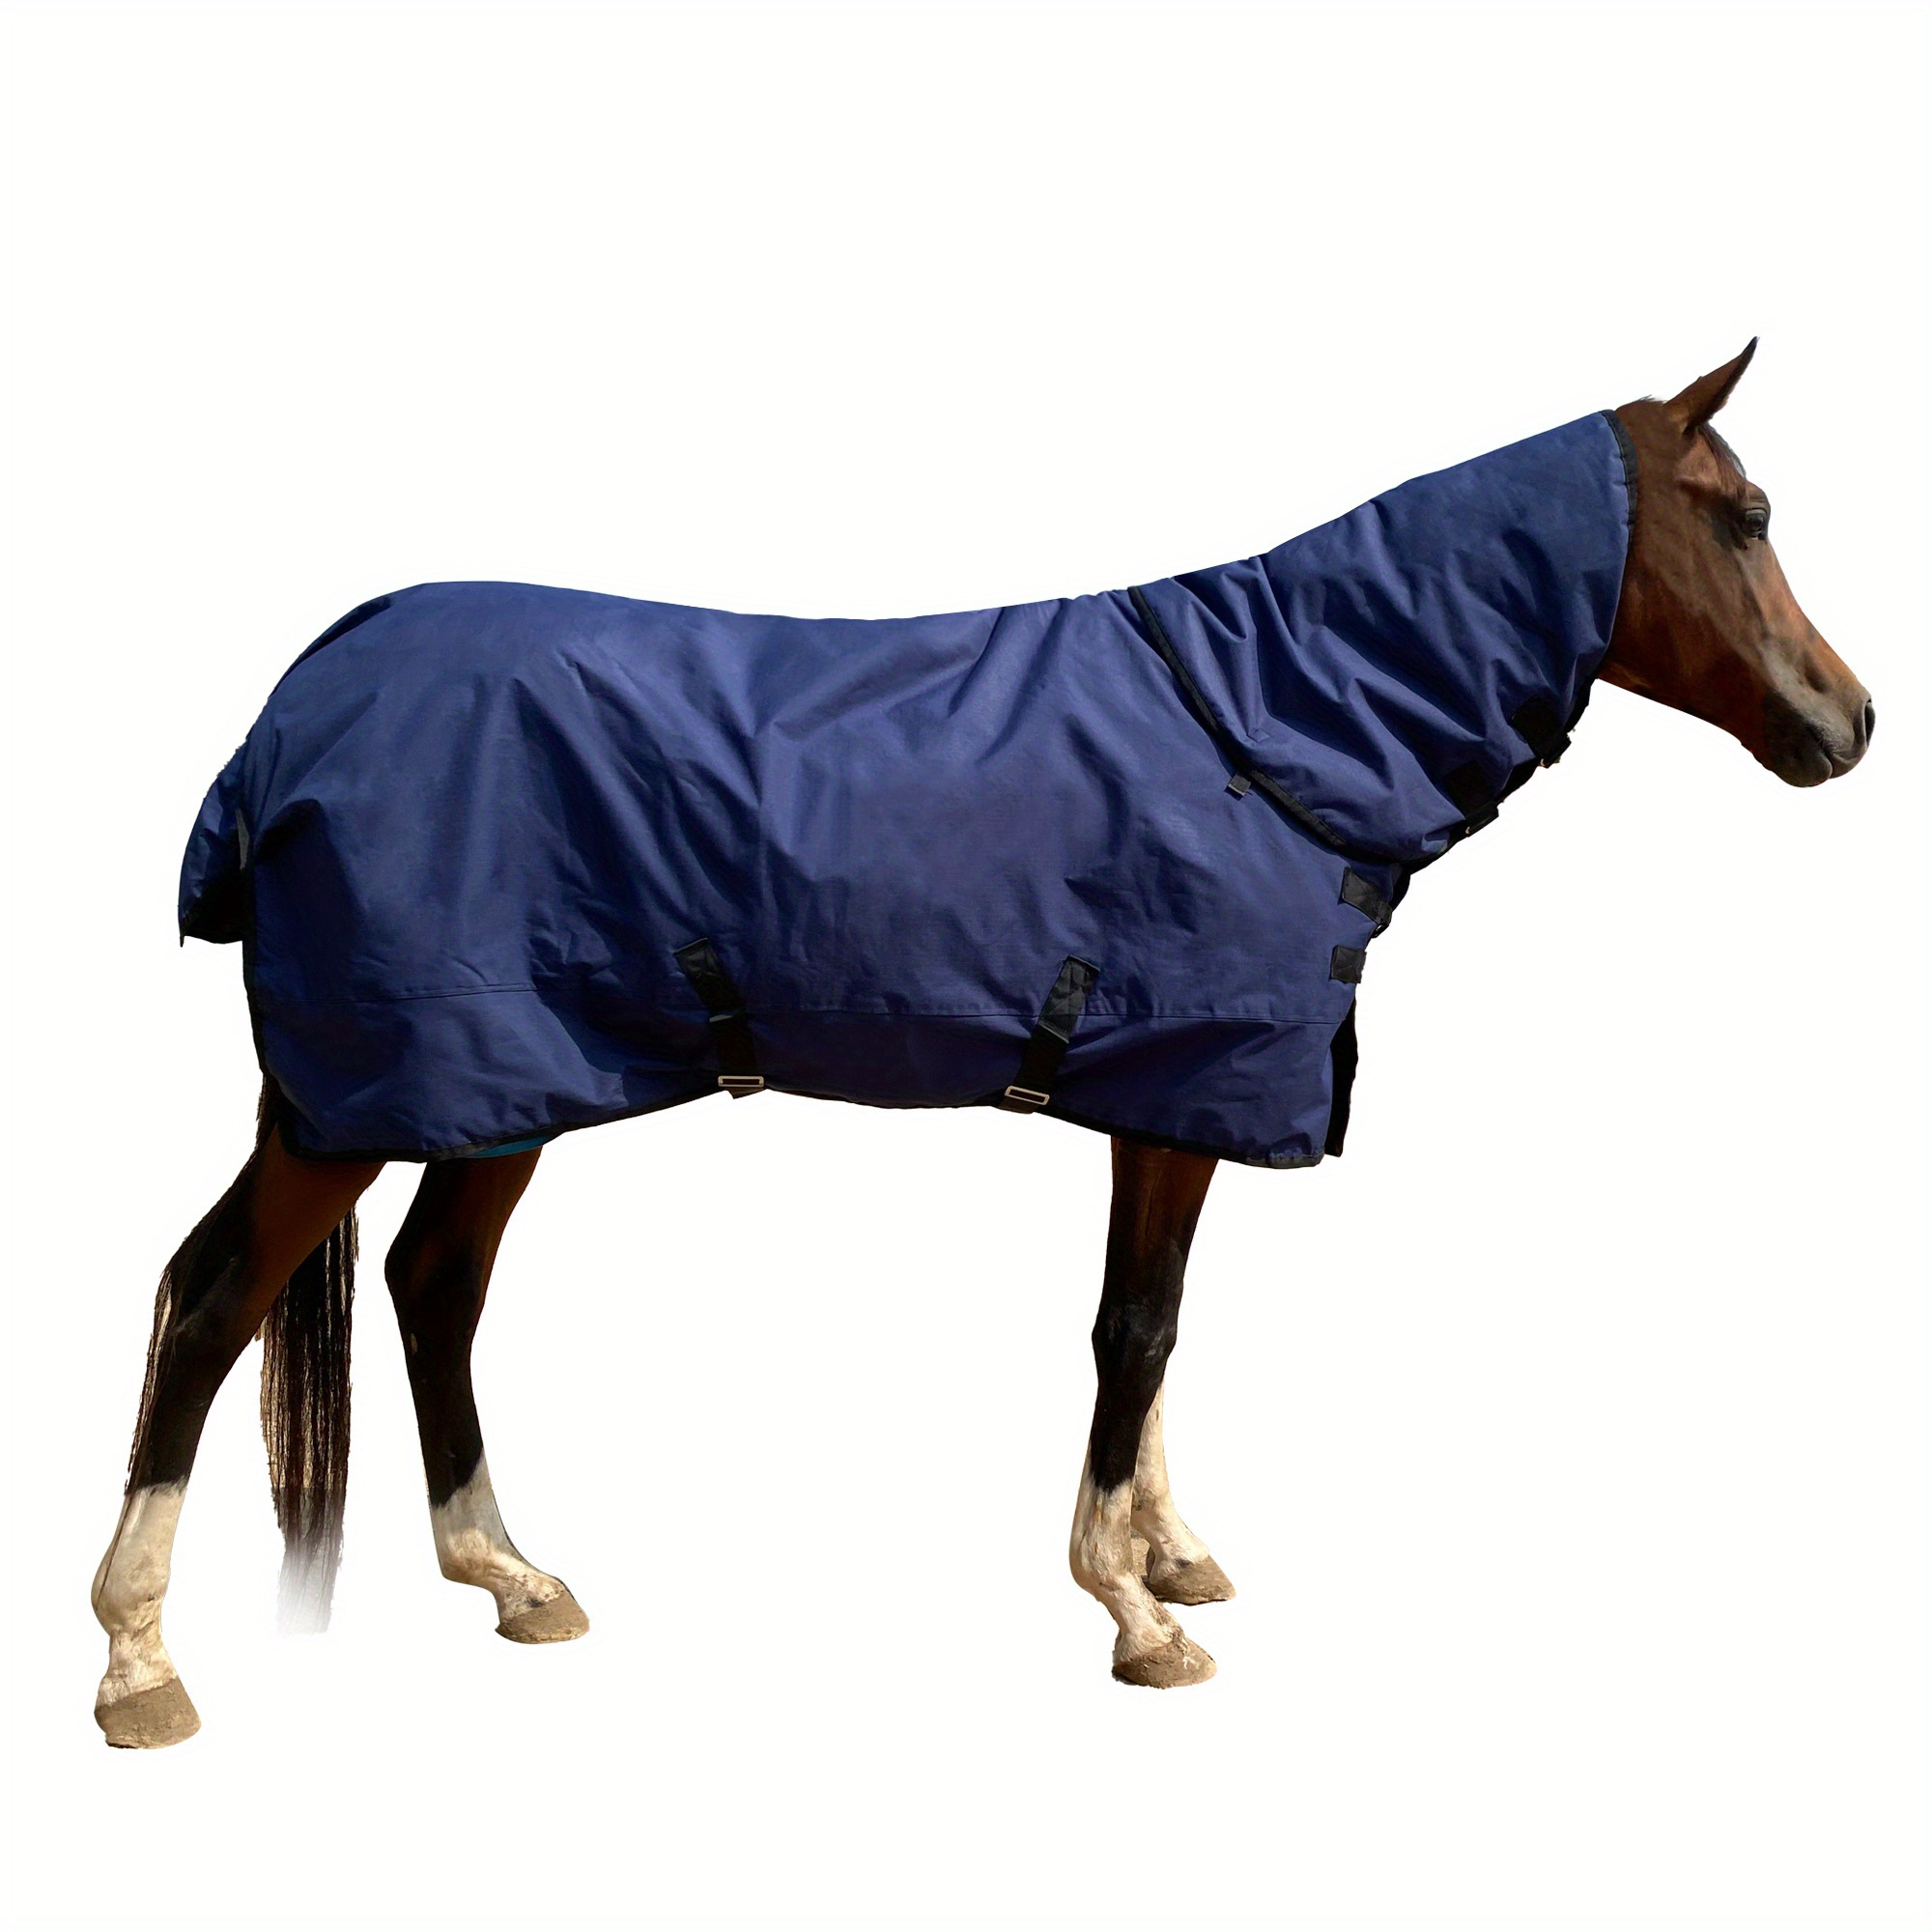  Horse Blanket Waterproofing Spray & Fabric Tech Wash - Duo  Pack : Sports & Outdoors